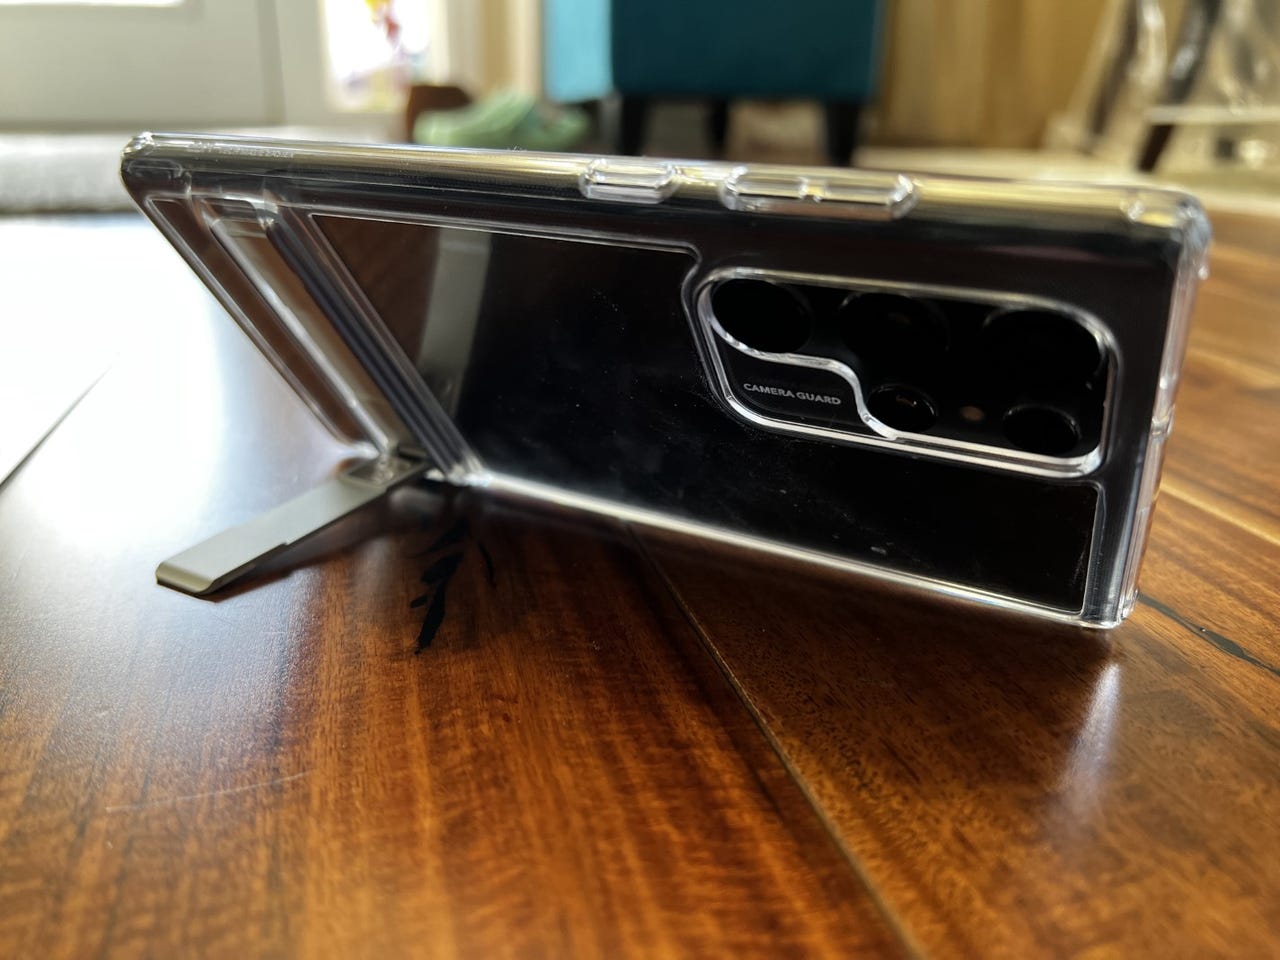 ESR Samsung Galaxy S22 Ultra Metal Kickstand case hands-on: Drop protection  with two-way stand